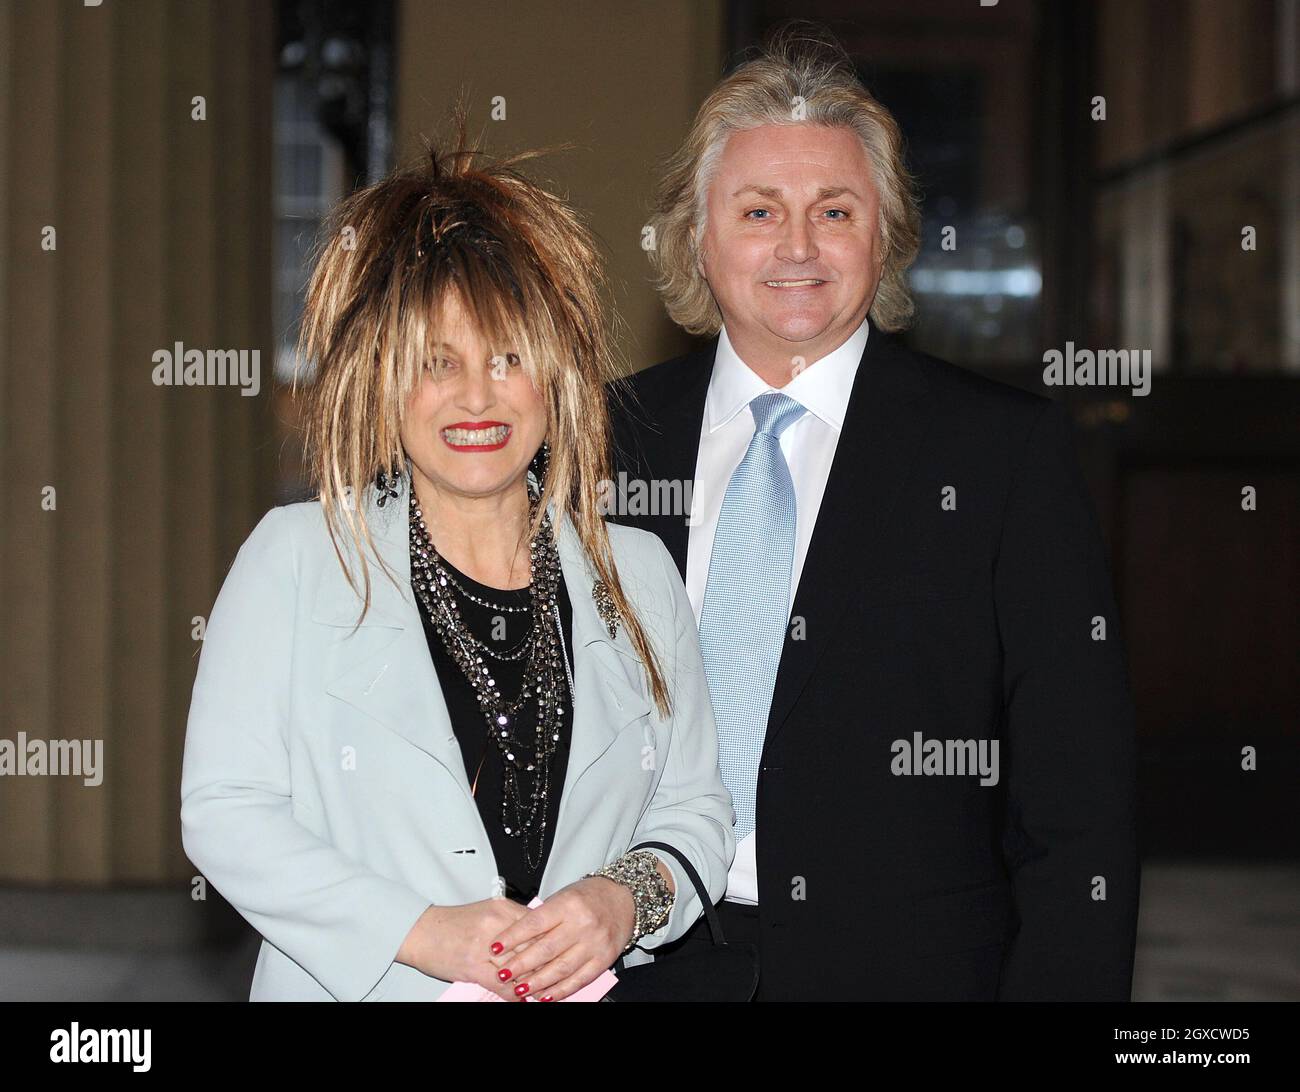 Fashion designers Elizabeth and David Emanuel arrive for a reception for the British Clothing Industry at Buckingham Palace on March 16, 2010. Stock Photo